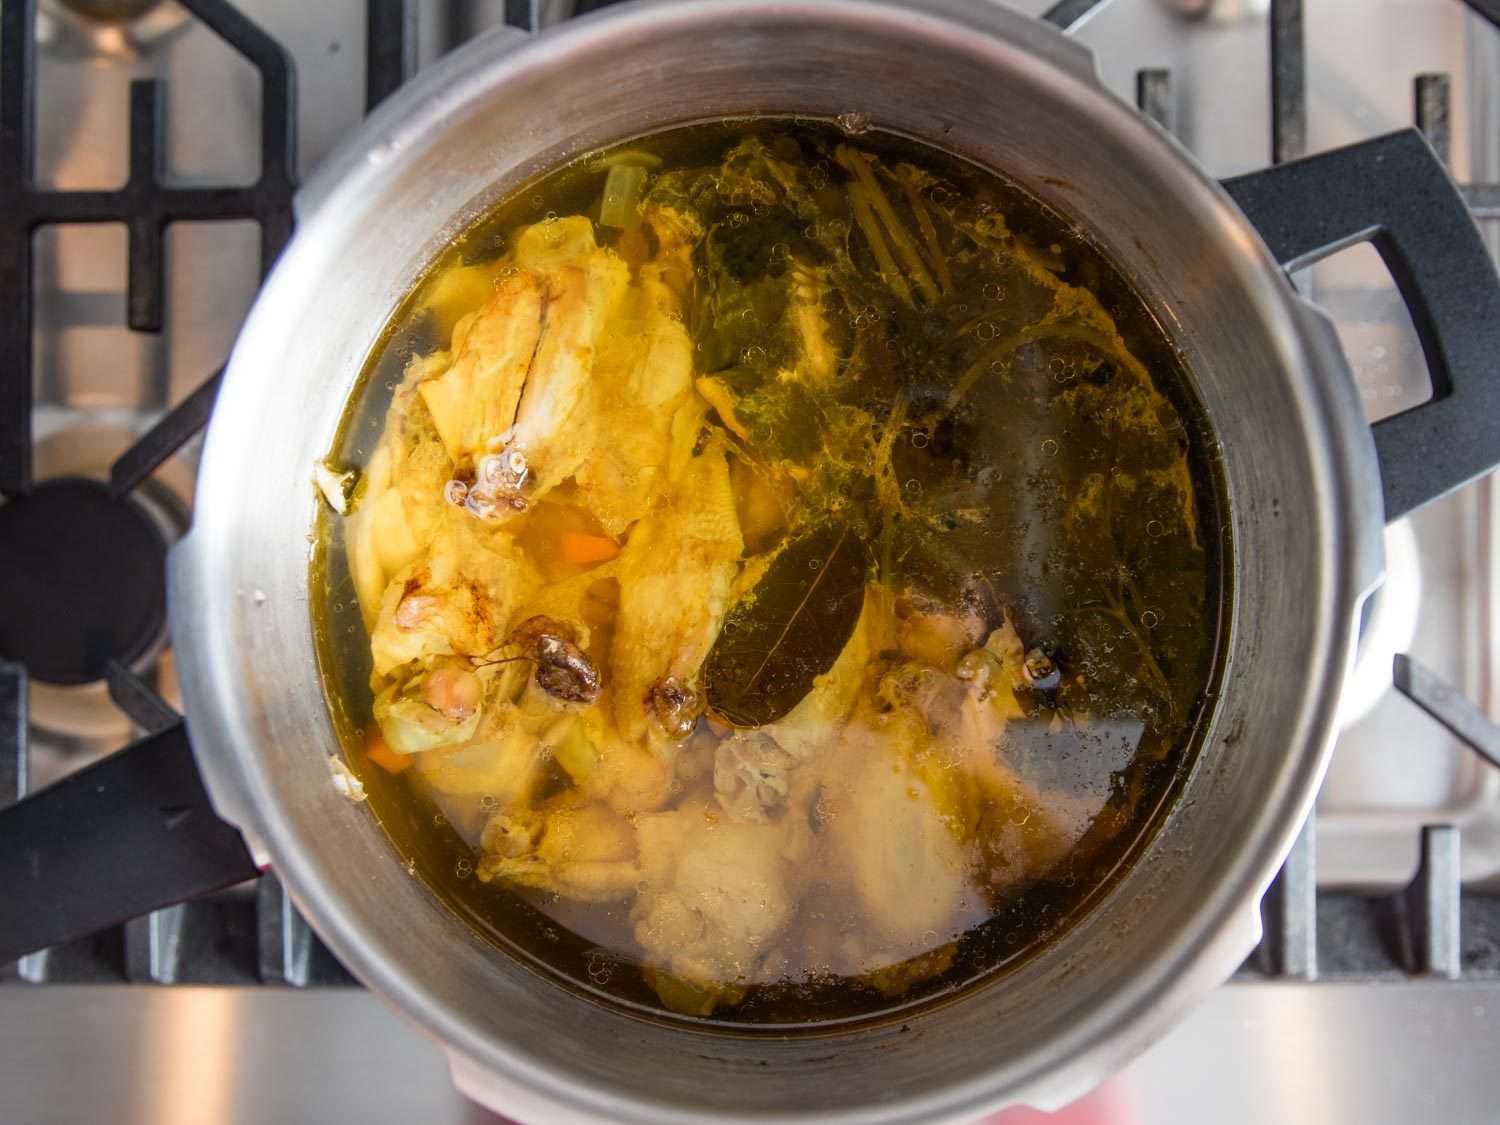 Overhead view of ingredients for chicken stock in a stovetop pressure cooker.